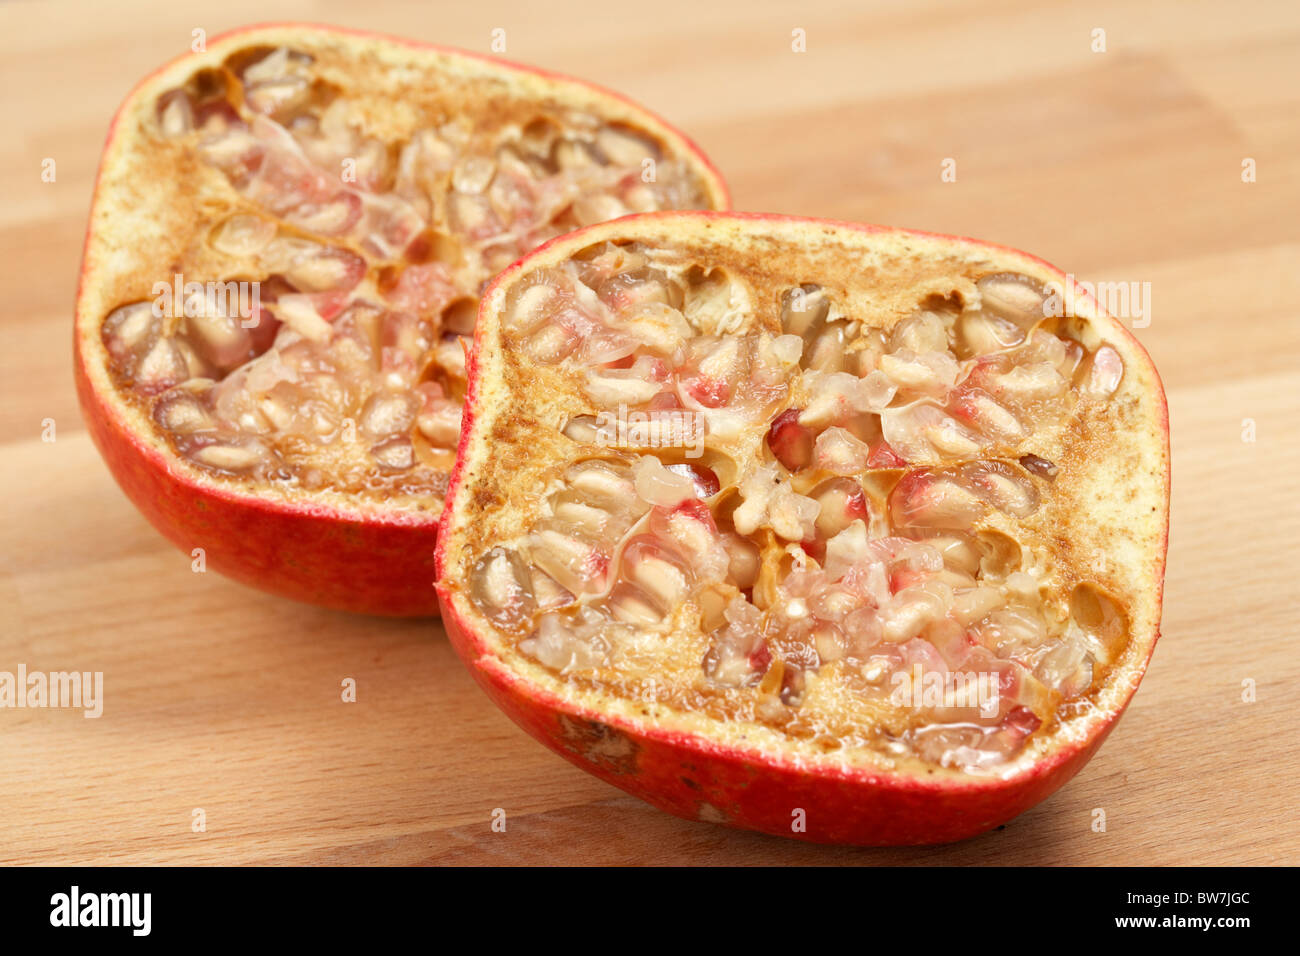 sliced halved pomegranate showing the arils and internal pulp Stock Photo